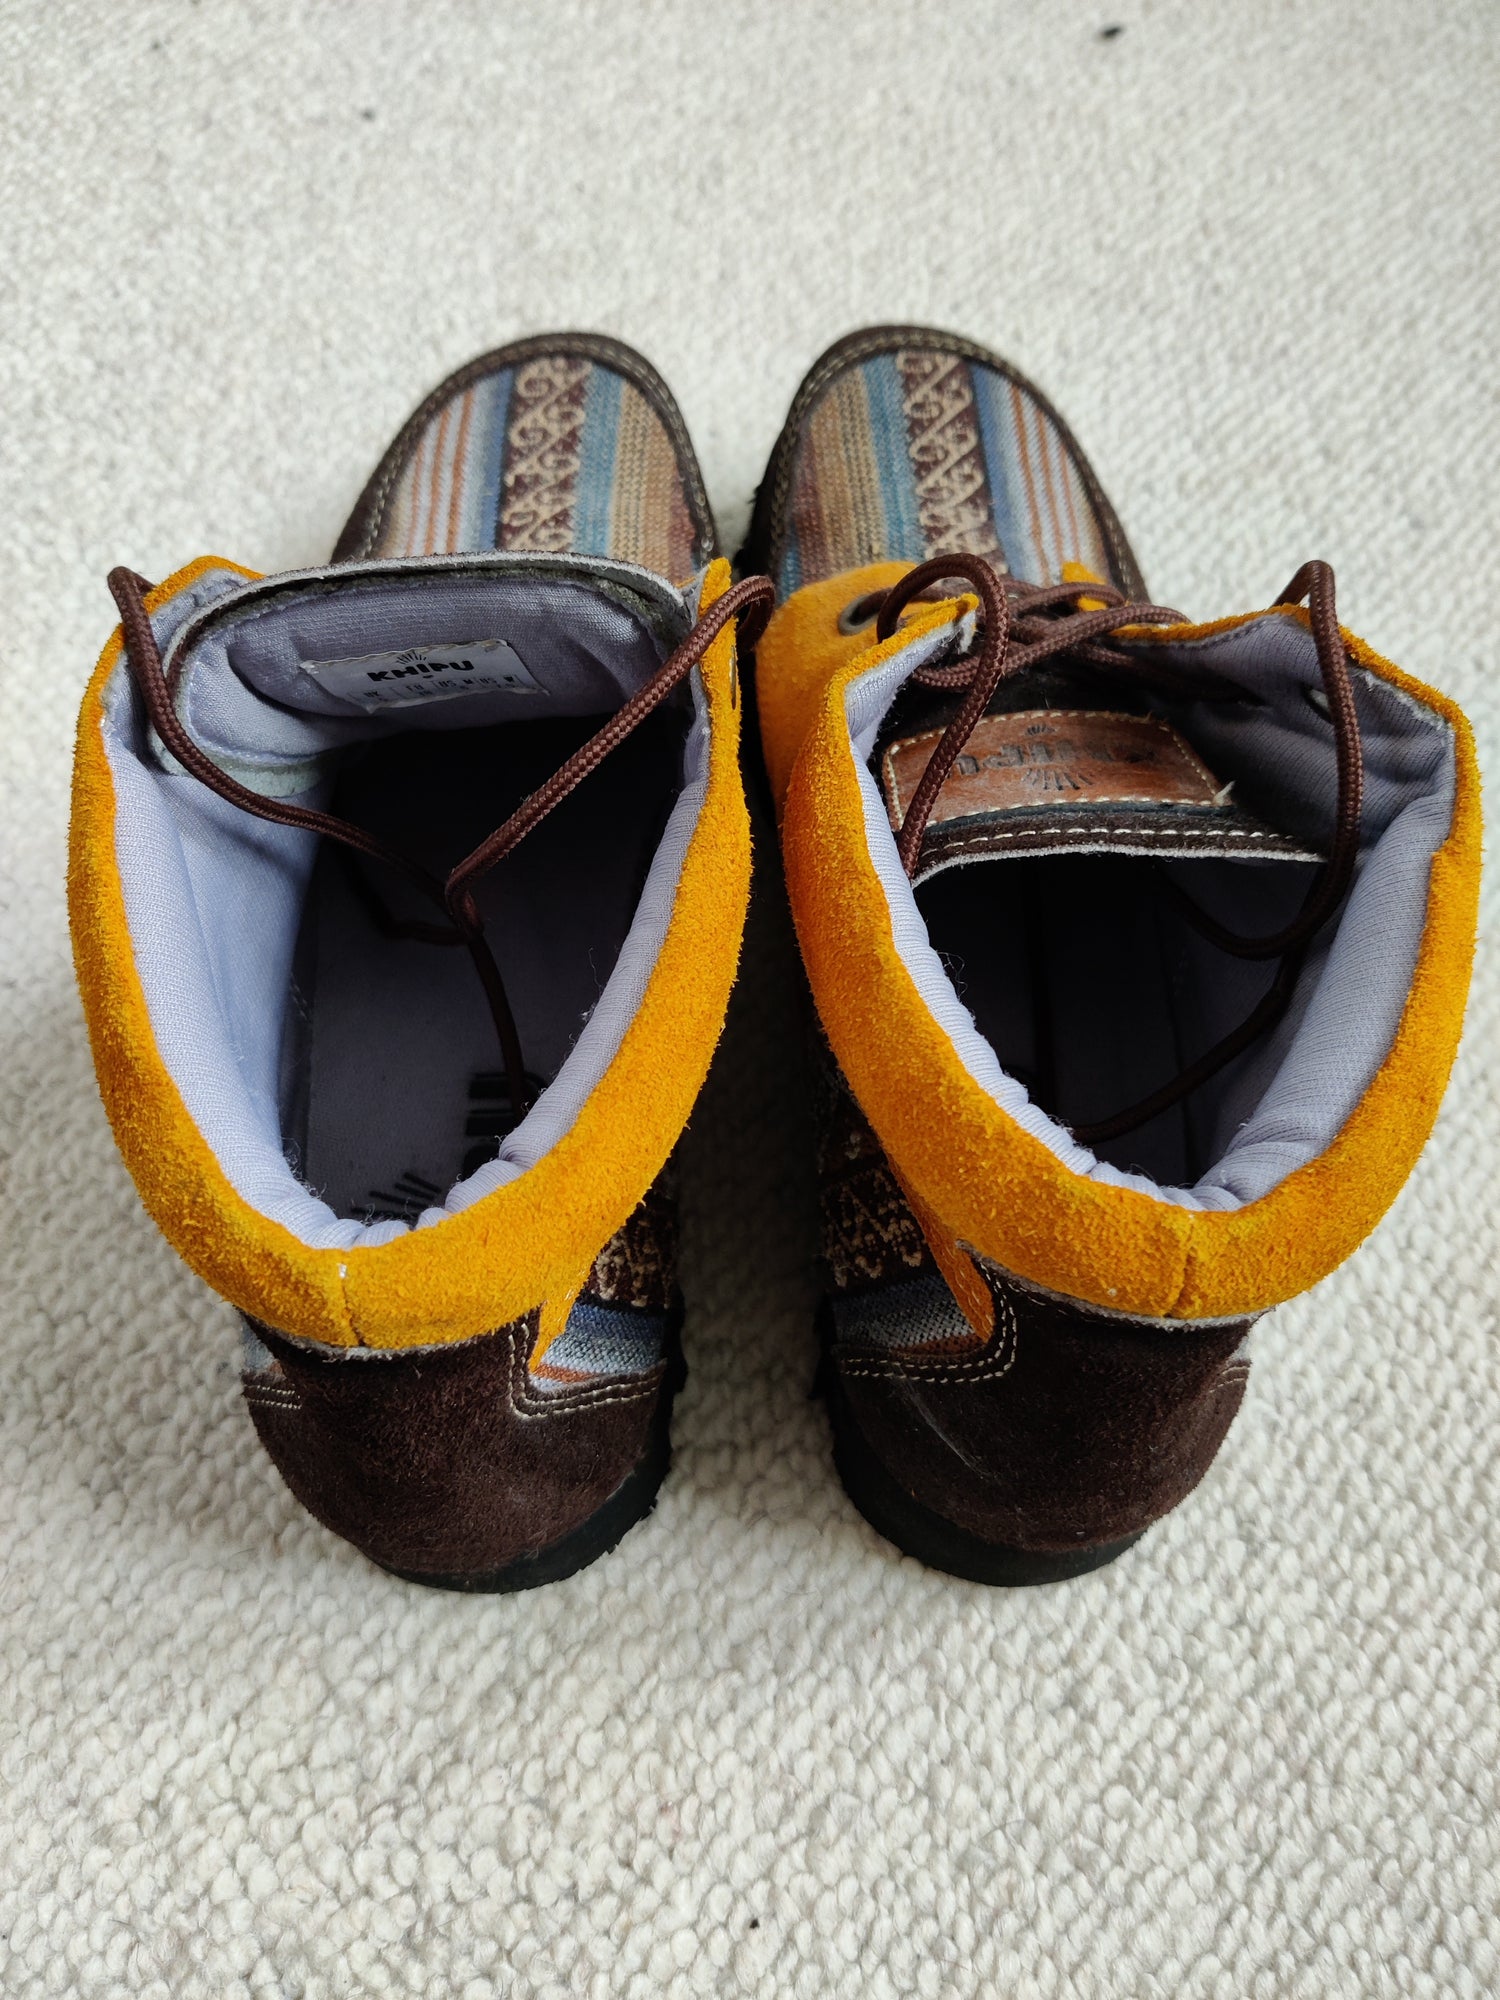 Preloved Handmade shoes from Peru - size 5